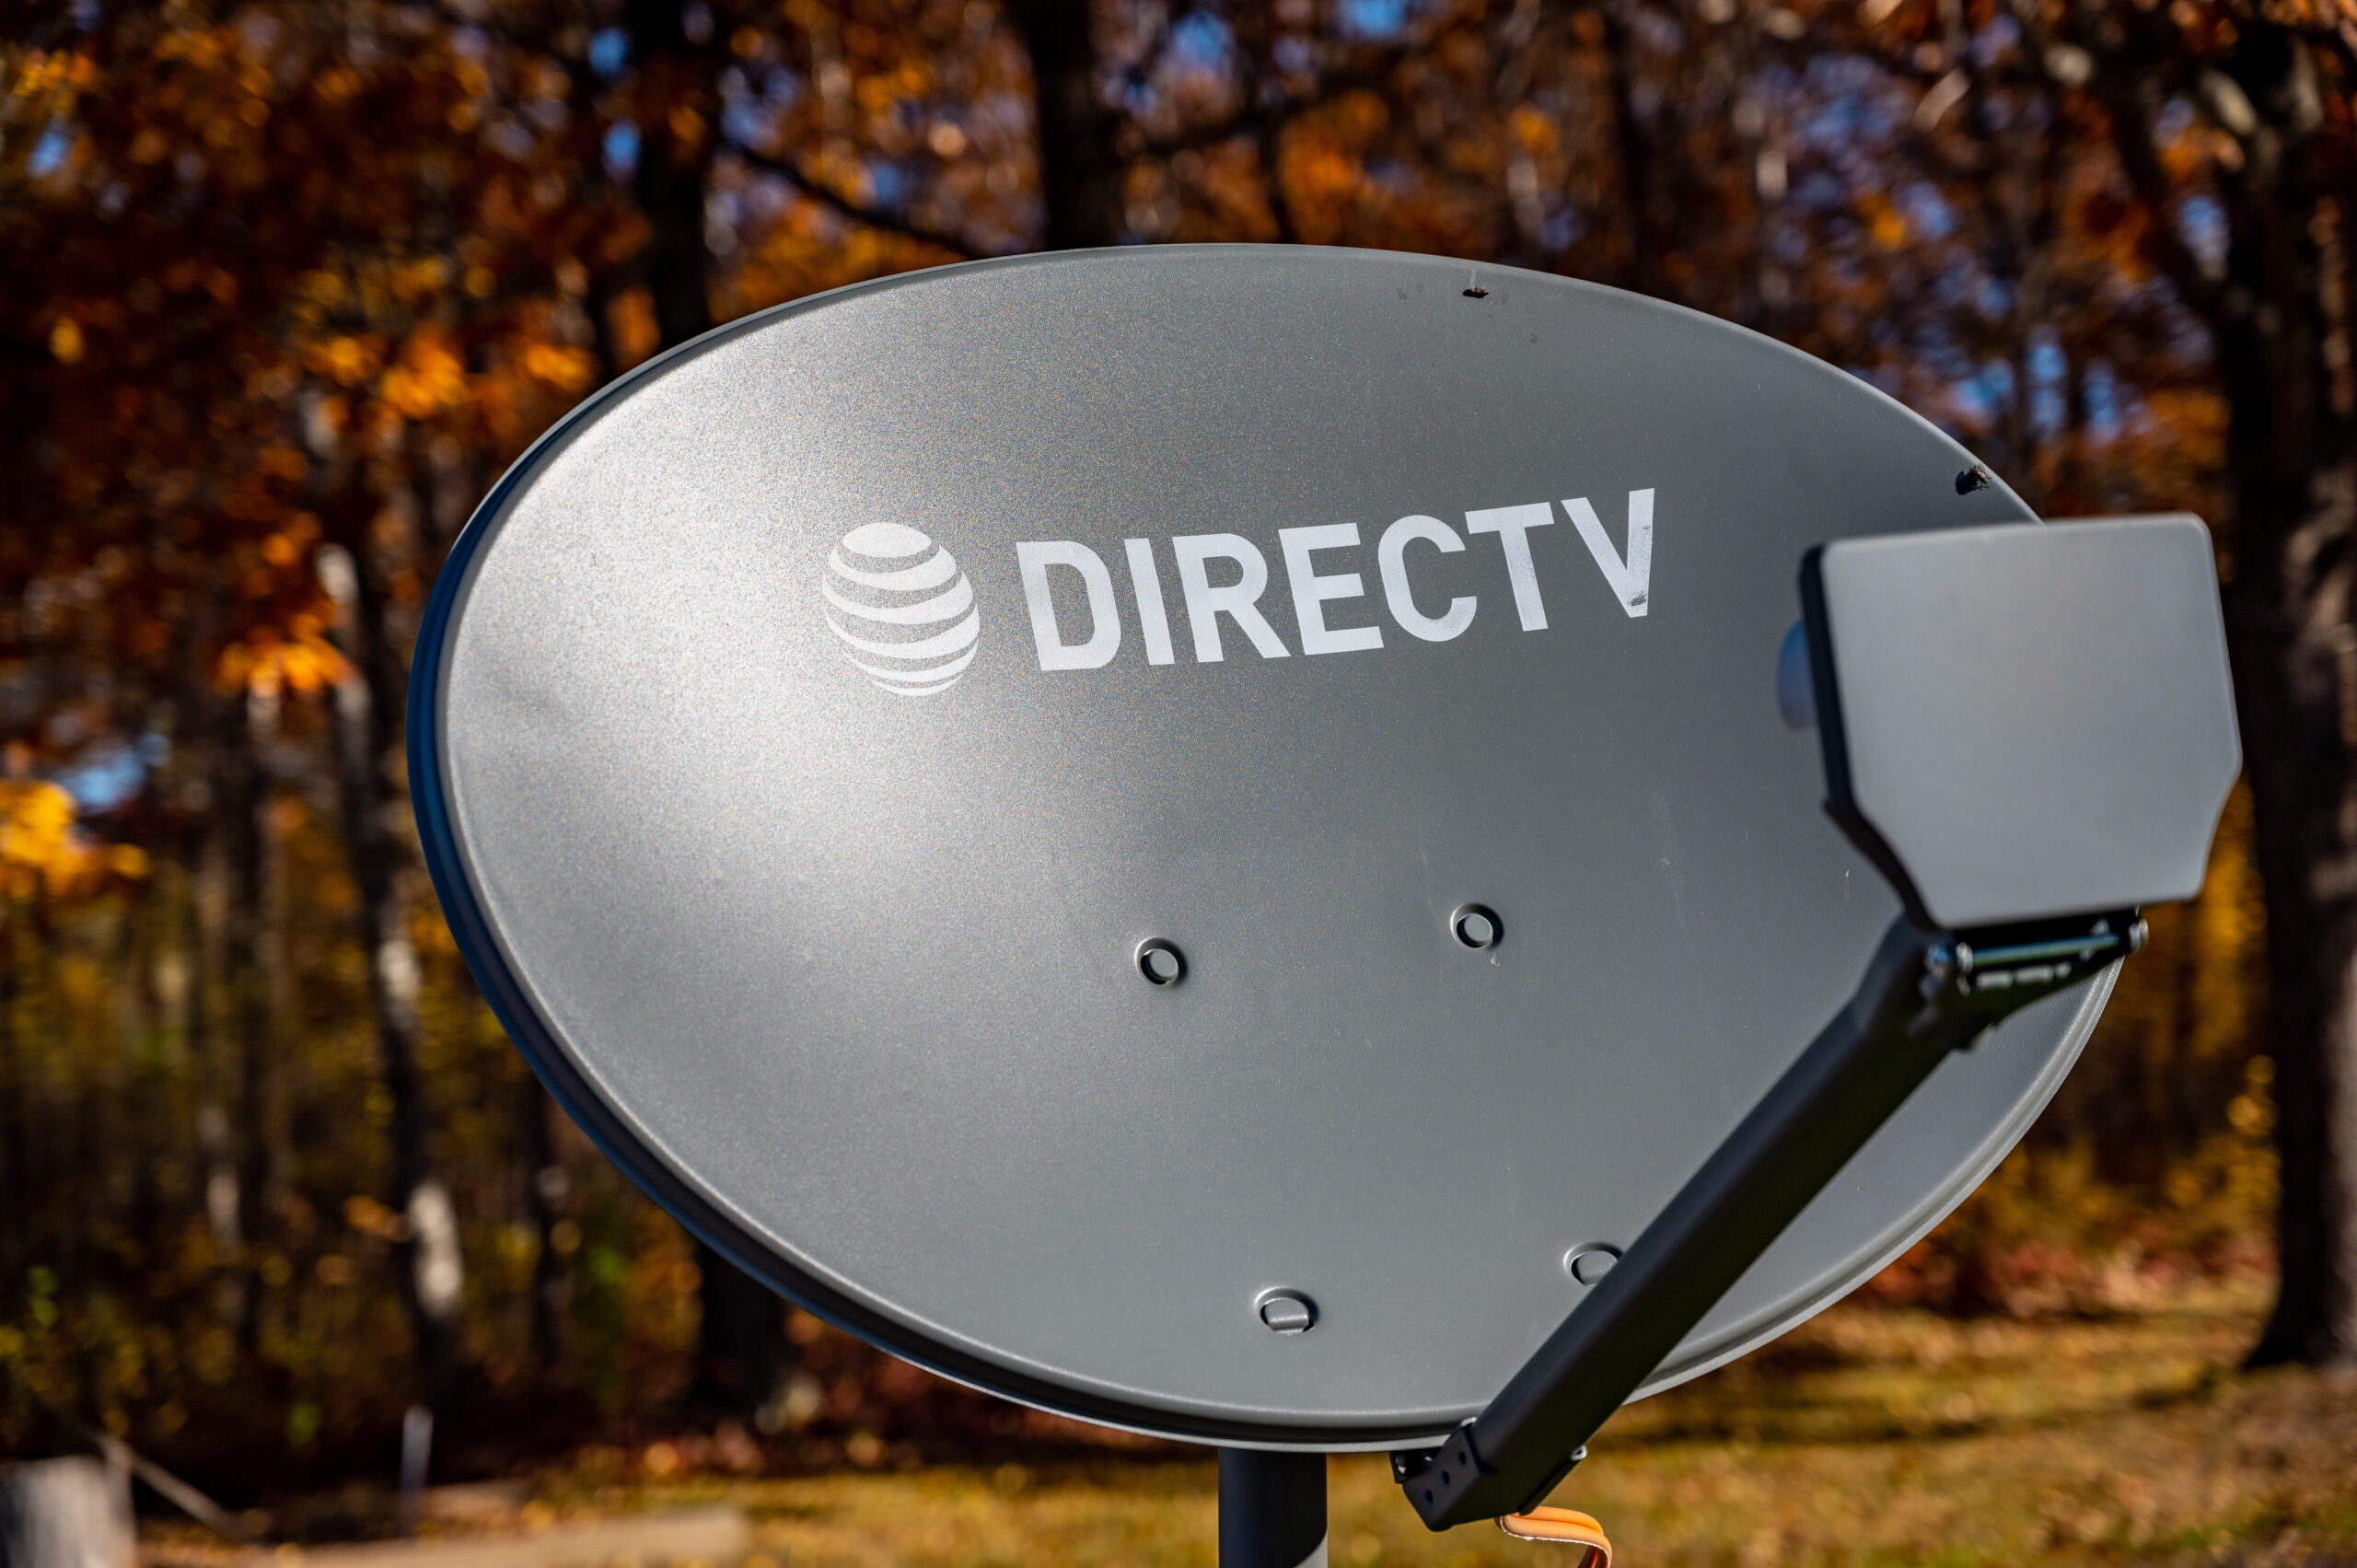 DIRECTV May Soon Raise Its Price Again if The FCC Bans Early Termination Fees